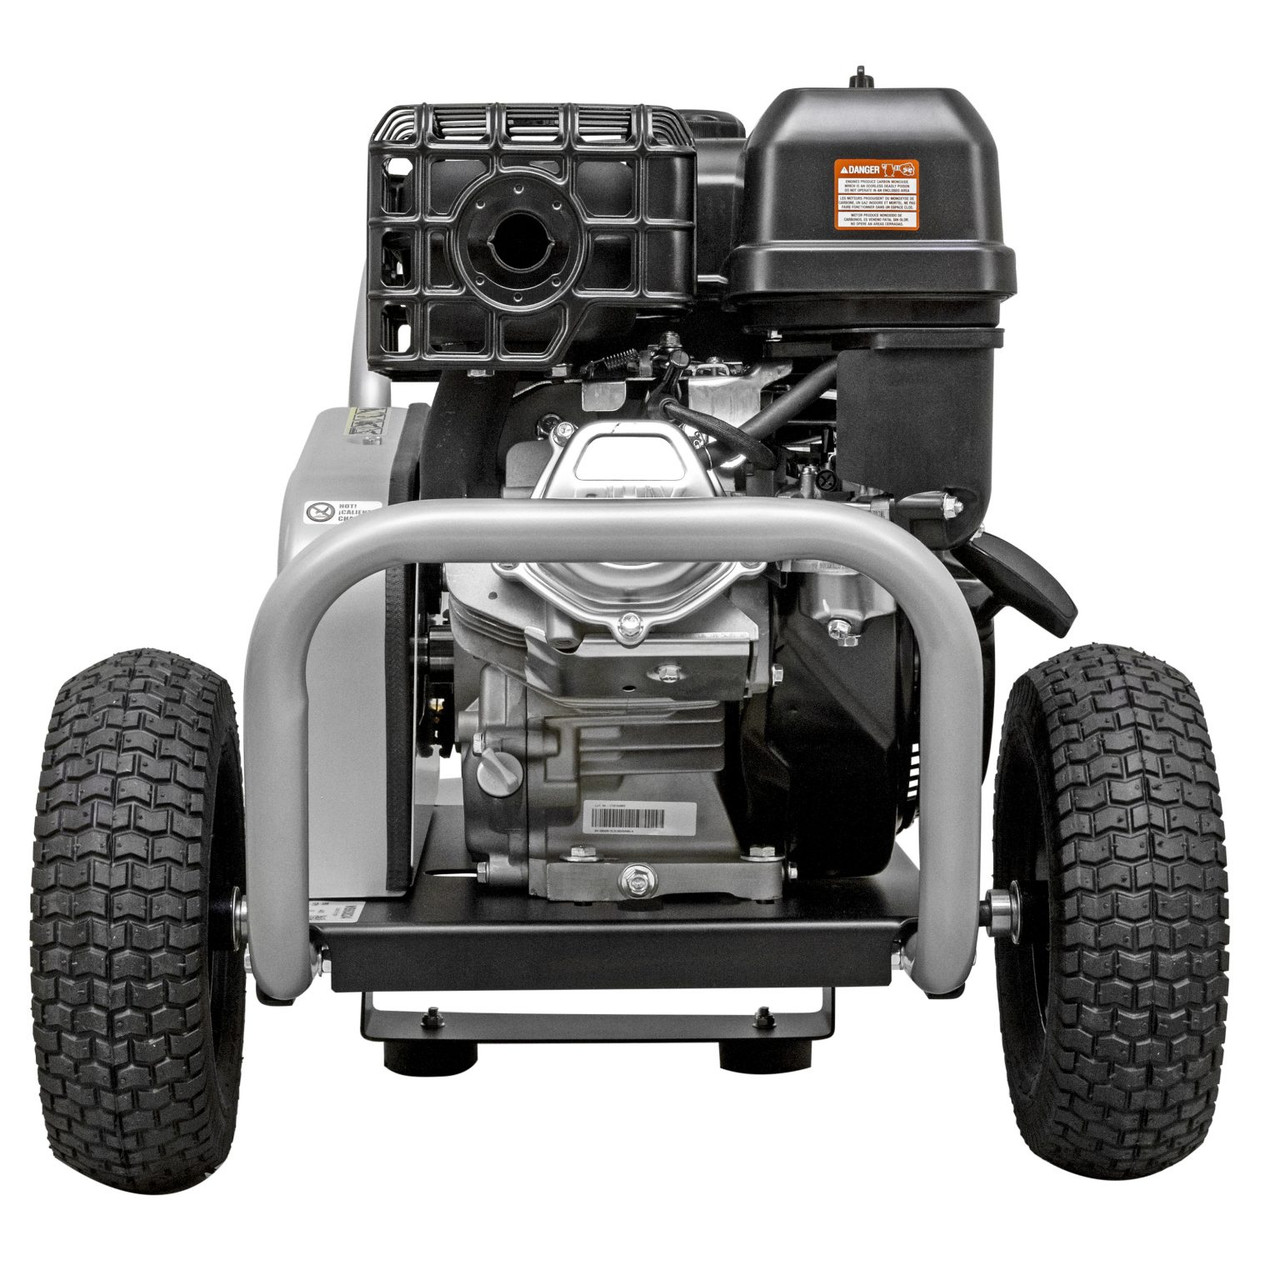 SIMPSON Water Blaster WB60824 Gas Pressure Washer 4400 PSI at 4.0 GPM